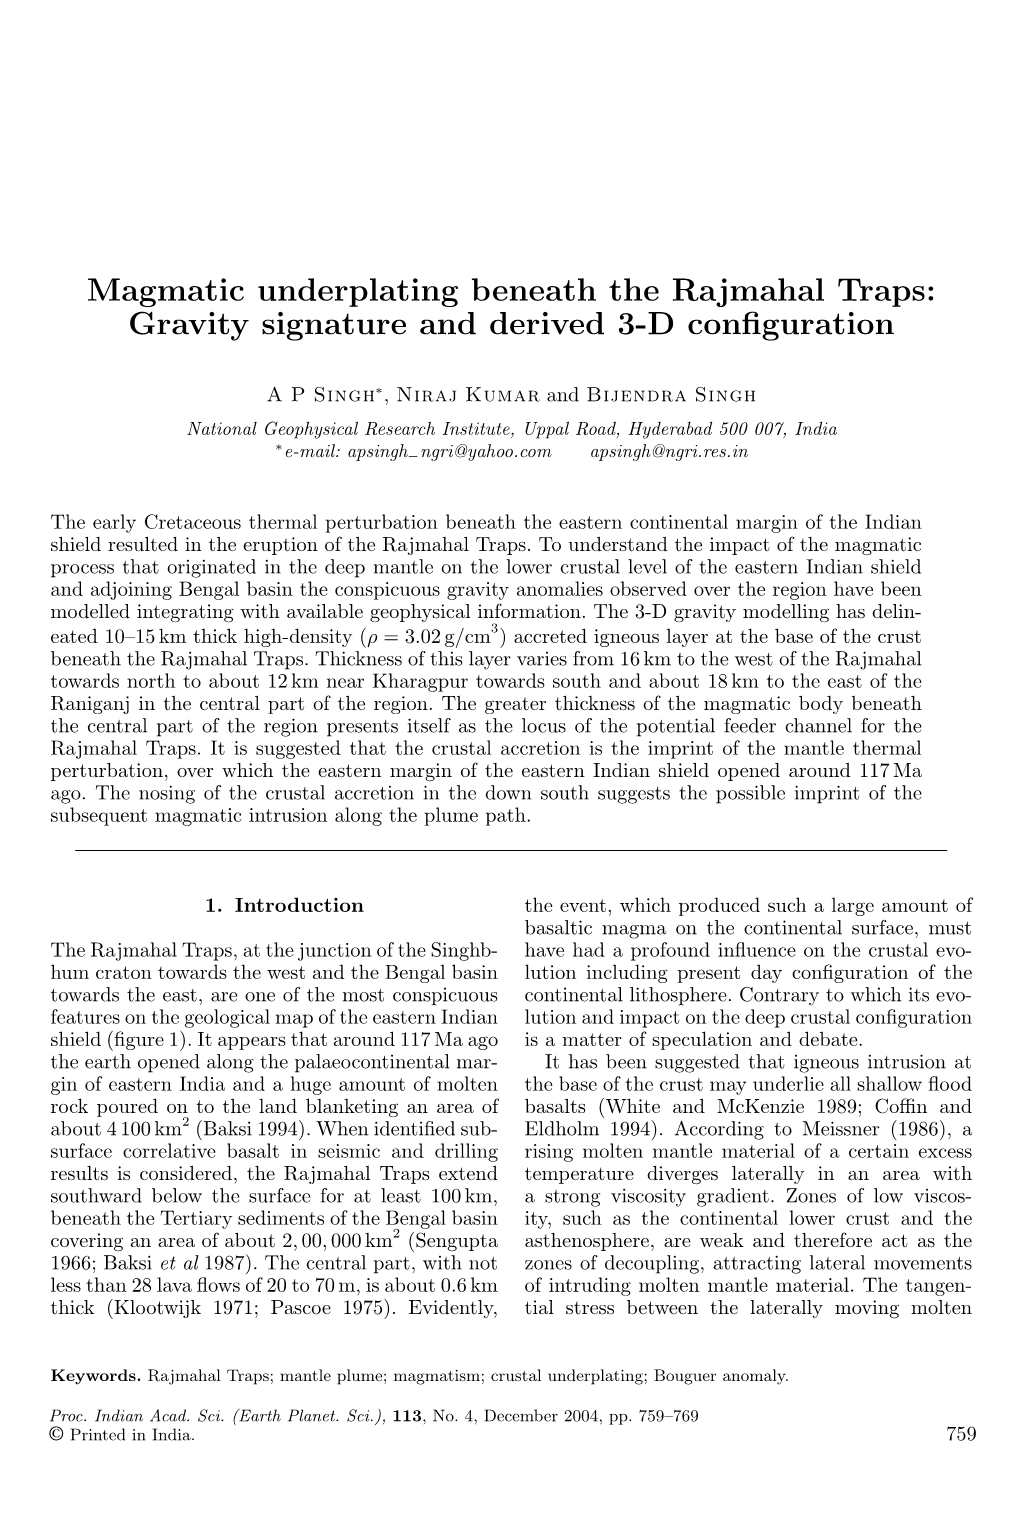 Magmatic Underplating Beneath the Rajmahal Traps: Gravity Signature and Derived 3-D Conﬁguration